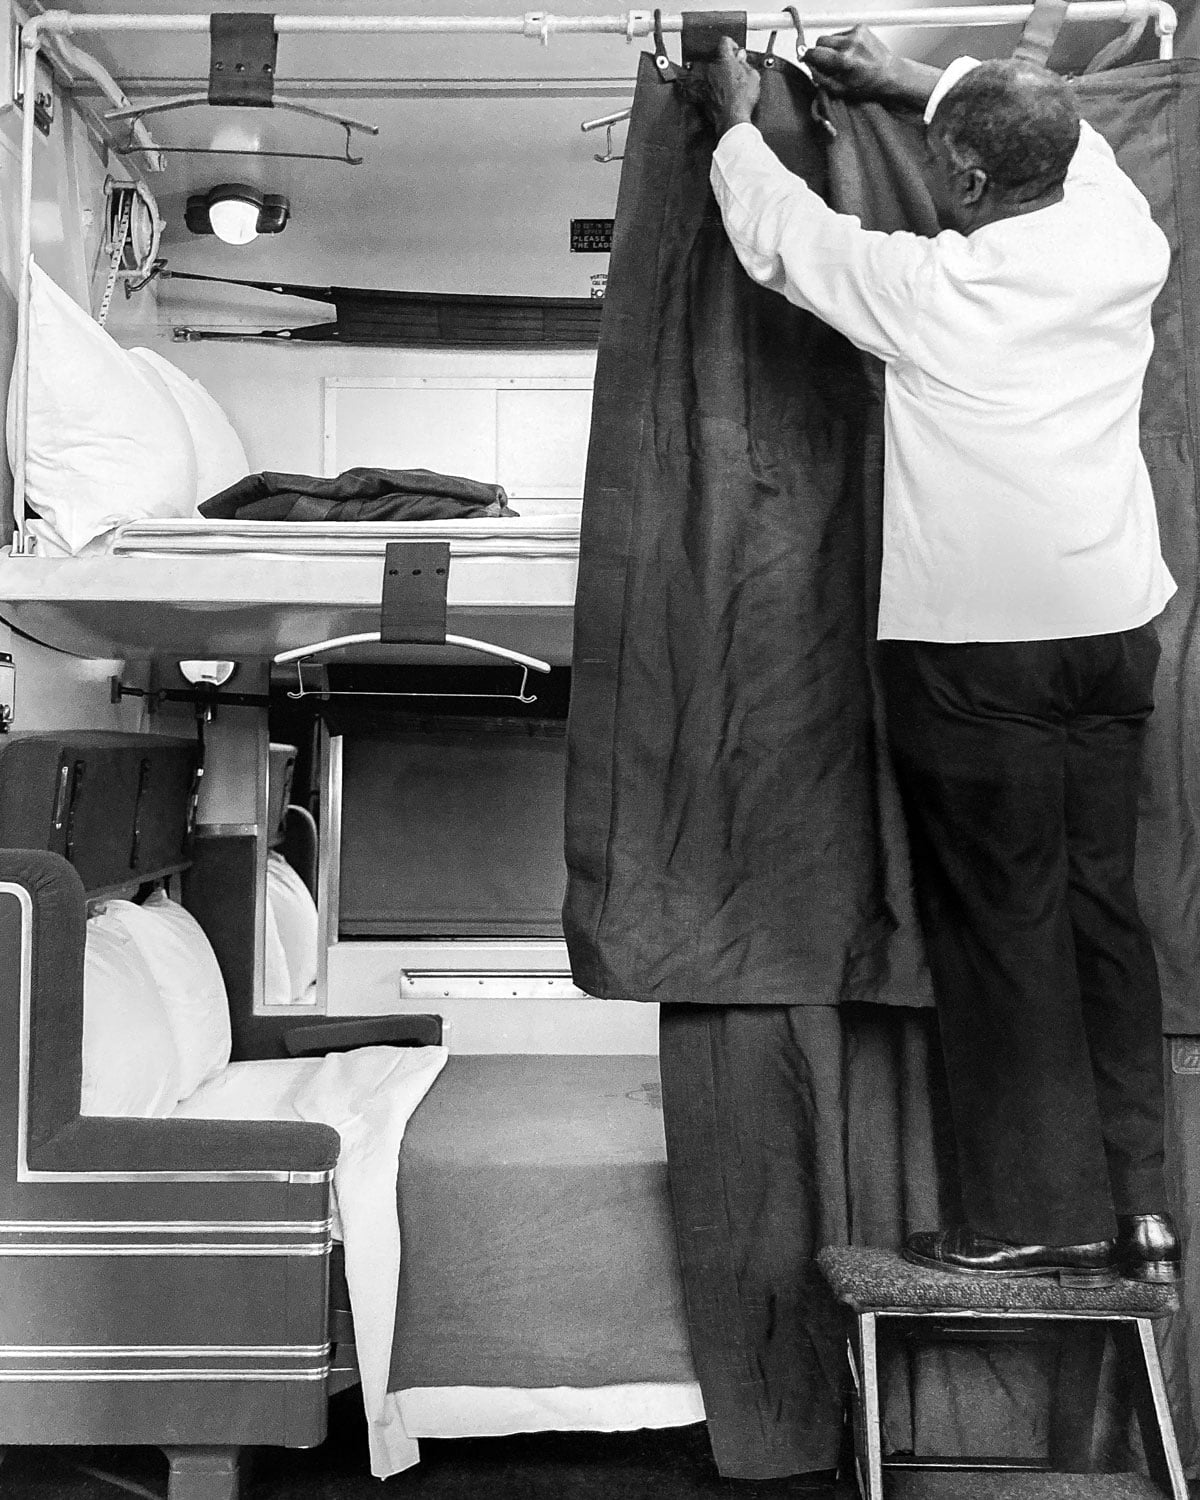 Porter hanging privacy curtain in train car